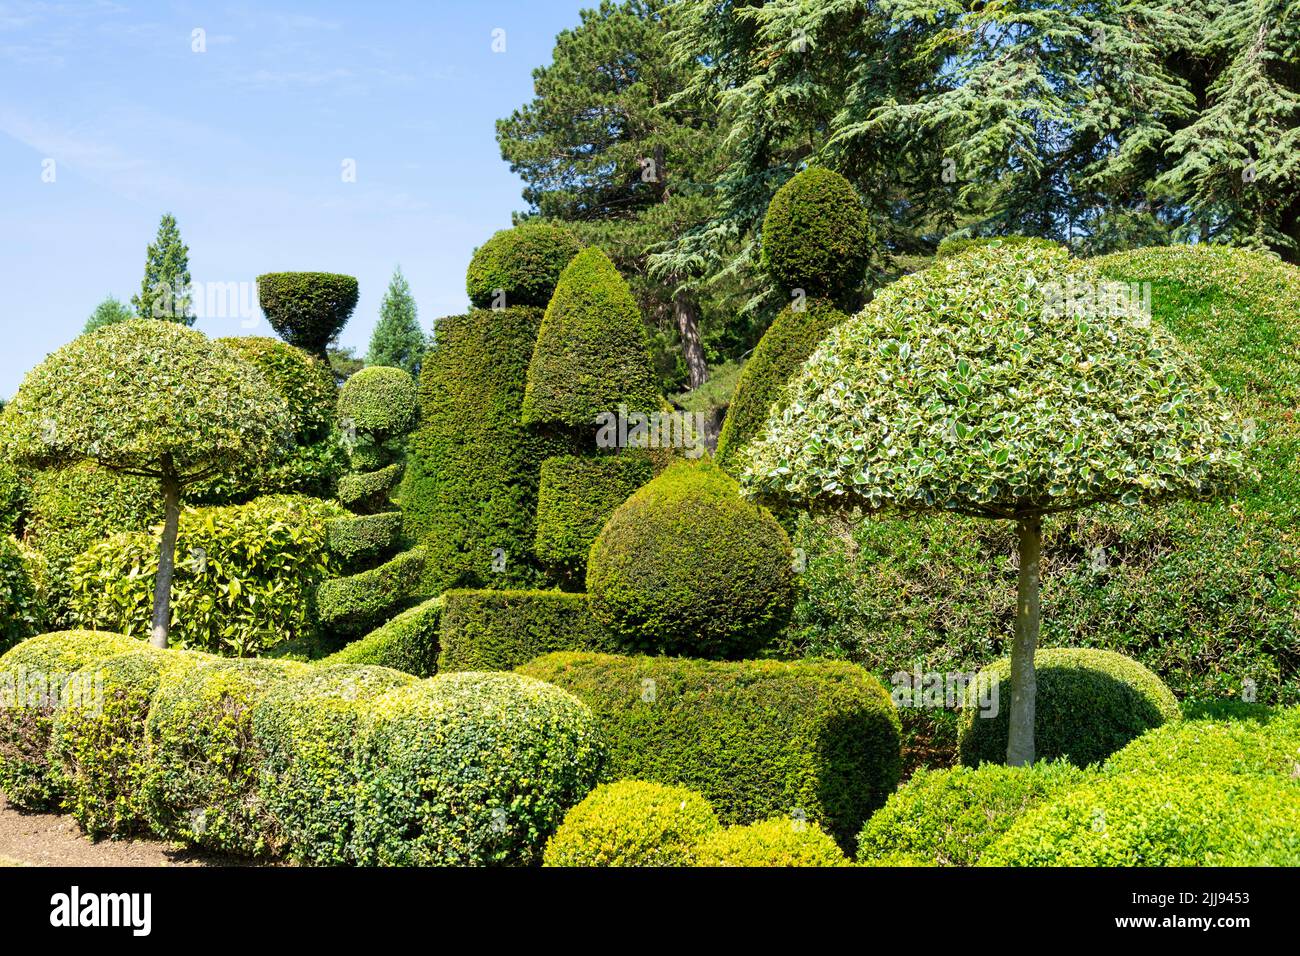 Yew and Box Topiary Garden à Brodsworth Hall and Gardens près de Doncaster South Yorkshire Angleterre GB Europe Banque D'Images